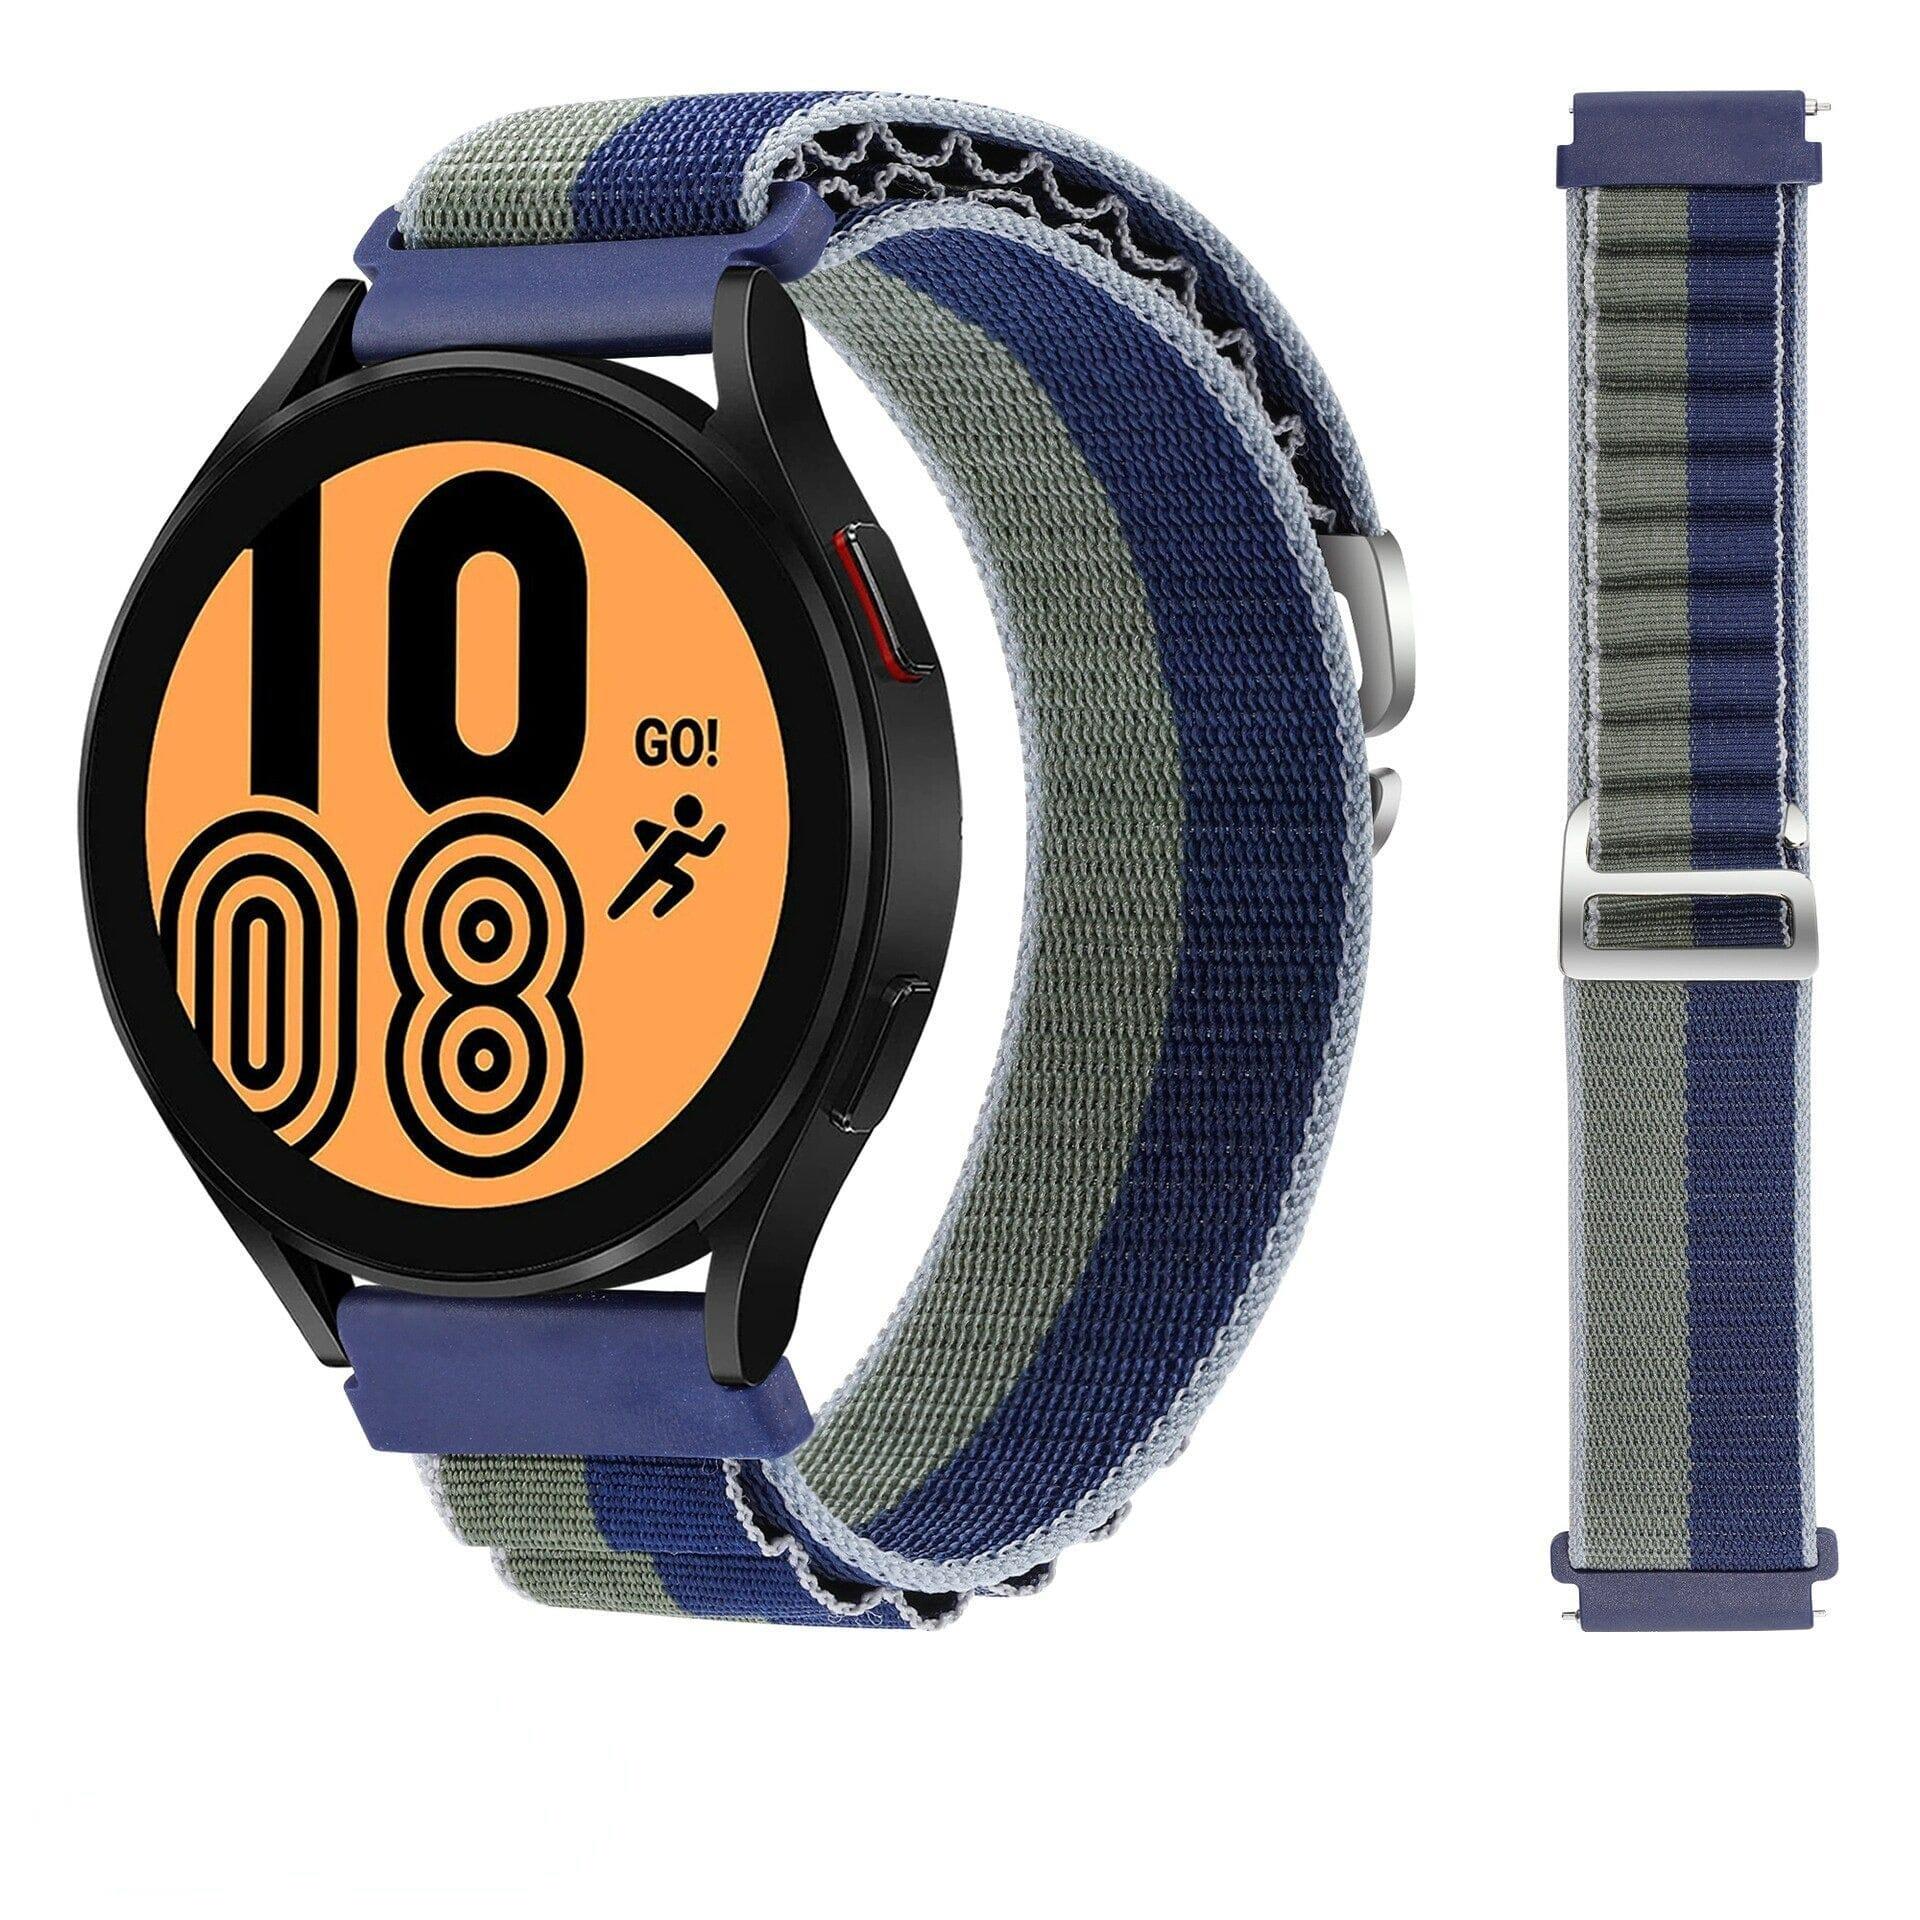 Alpine Loop Watch Straps Compatible with the Asus Zenwatch 2 (1.45")